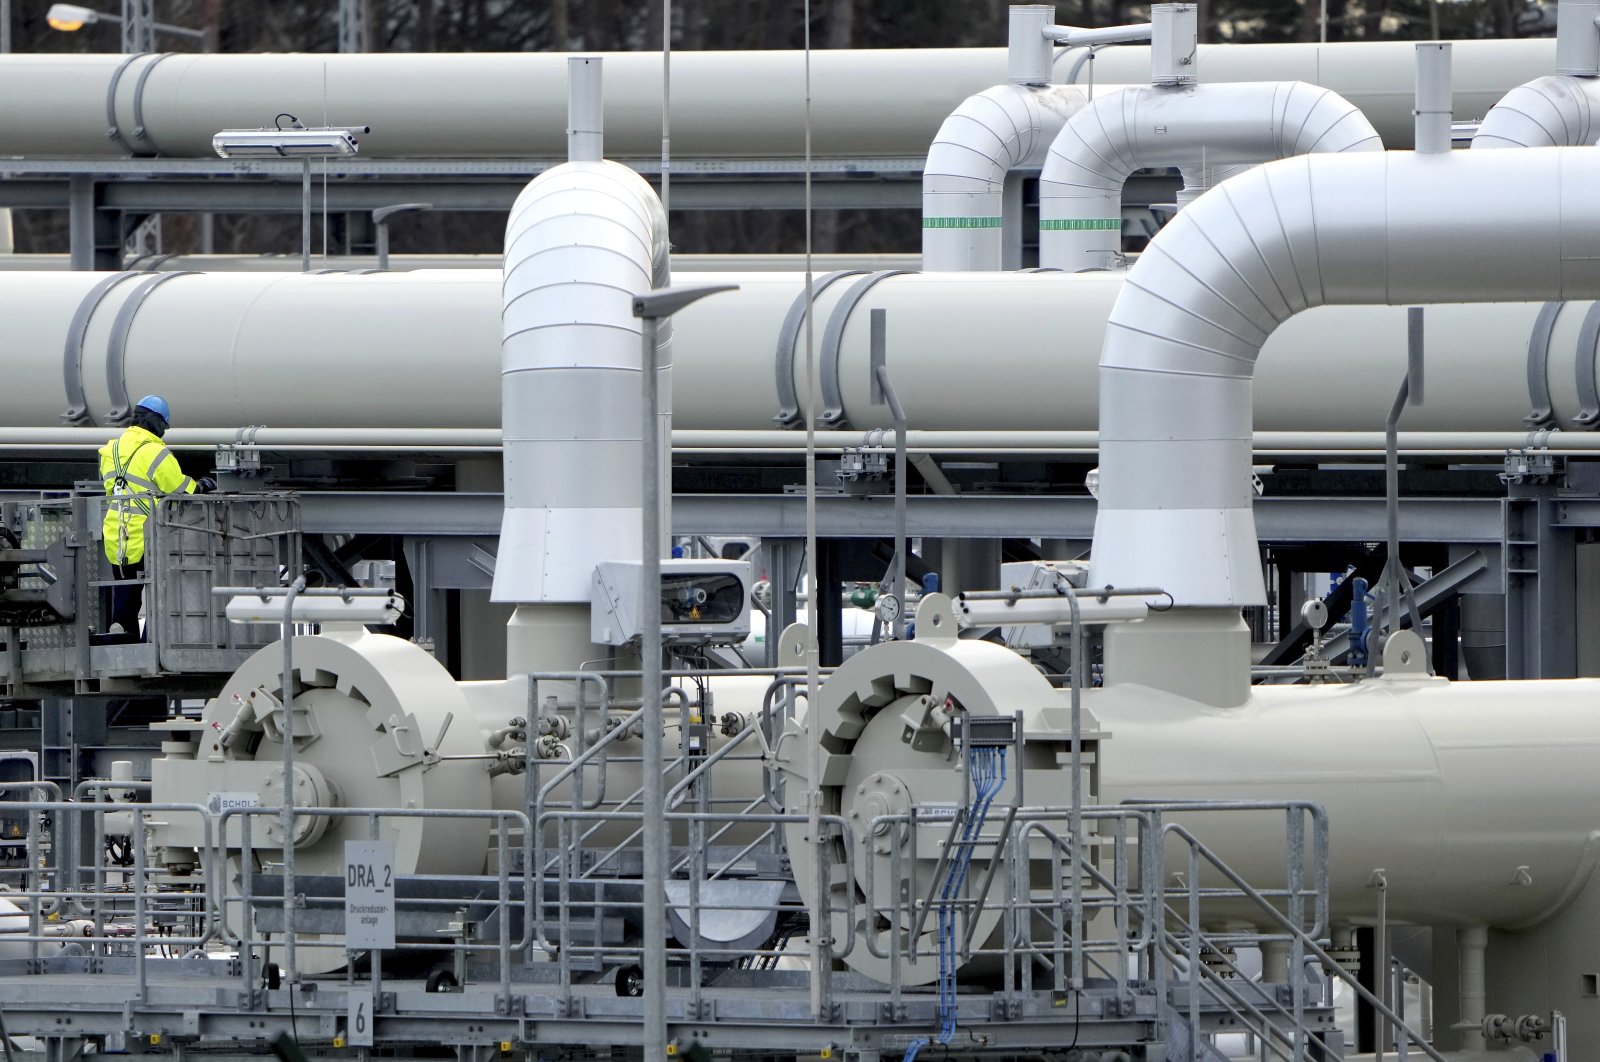 Pipes at the landfall facilities of the Nord Stream 2 gas pipeline pictured in Lubmin, northern Germany, Feb. 15, 2022. (AP Photo)